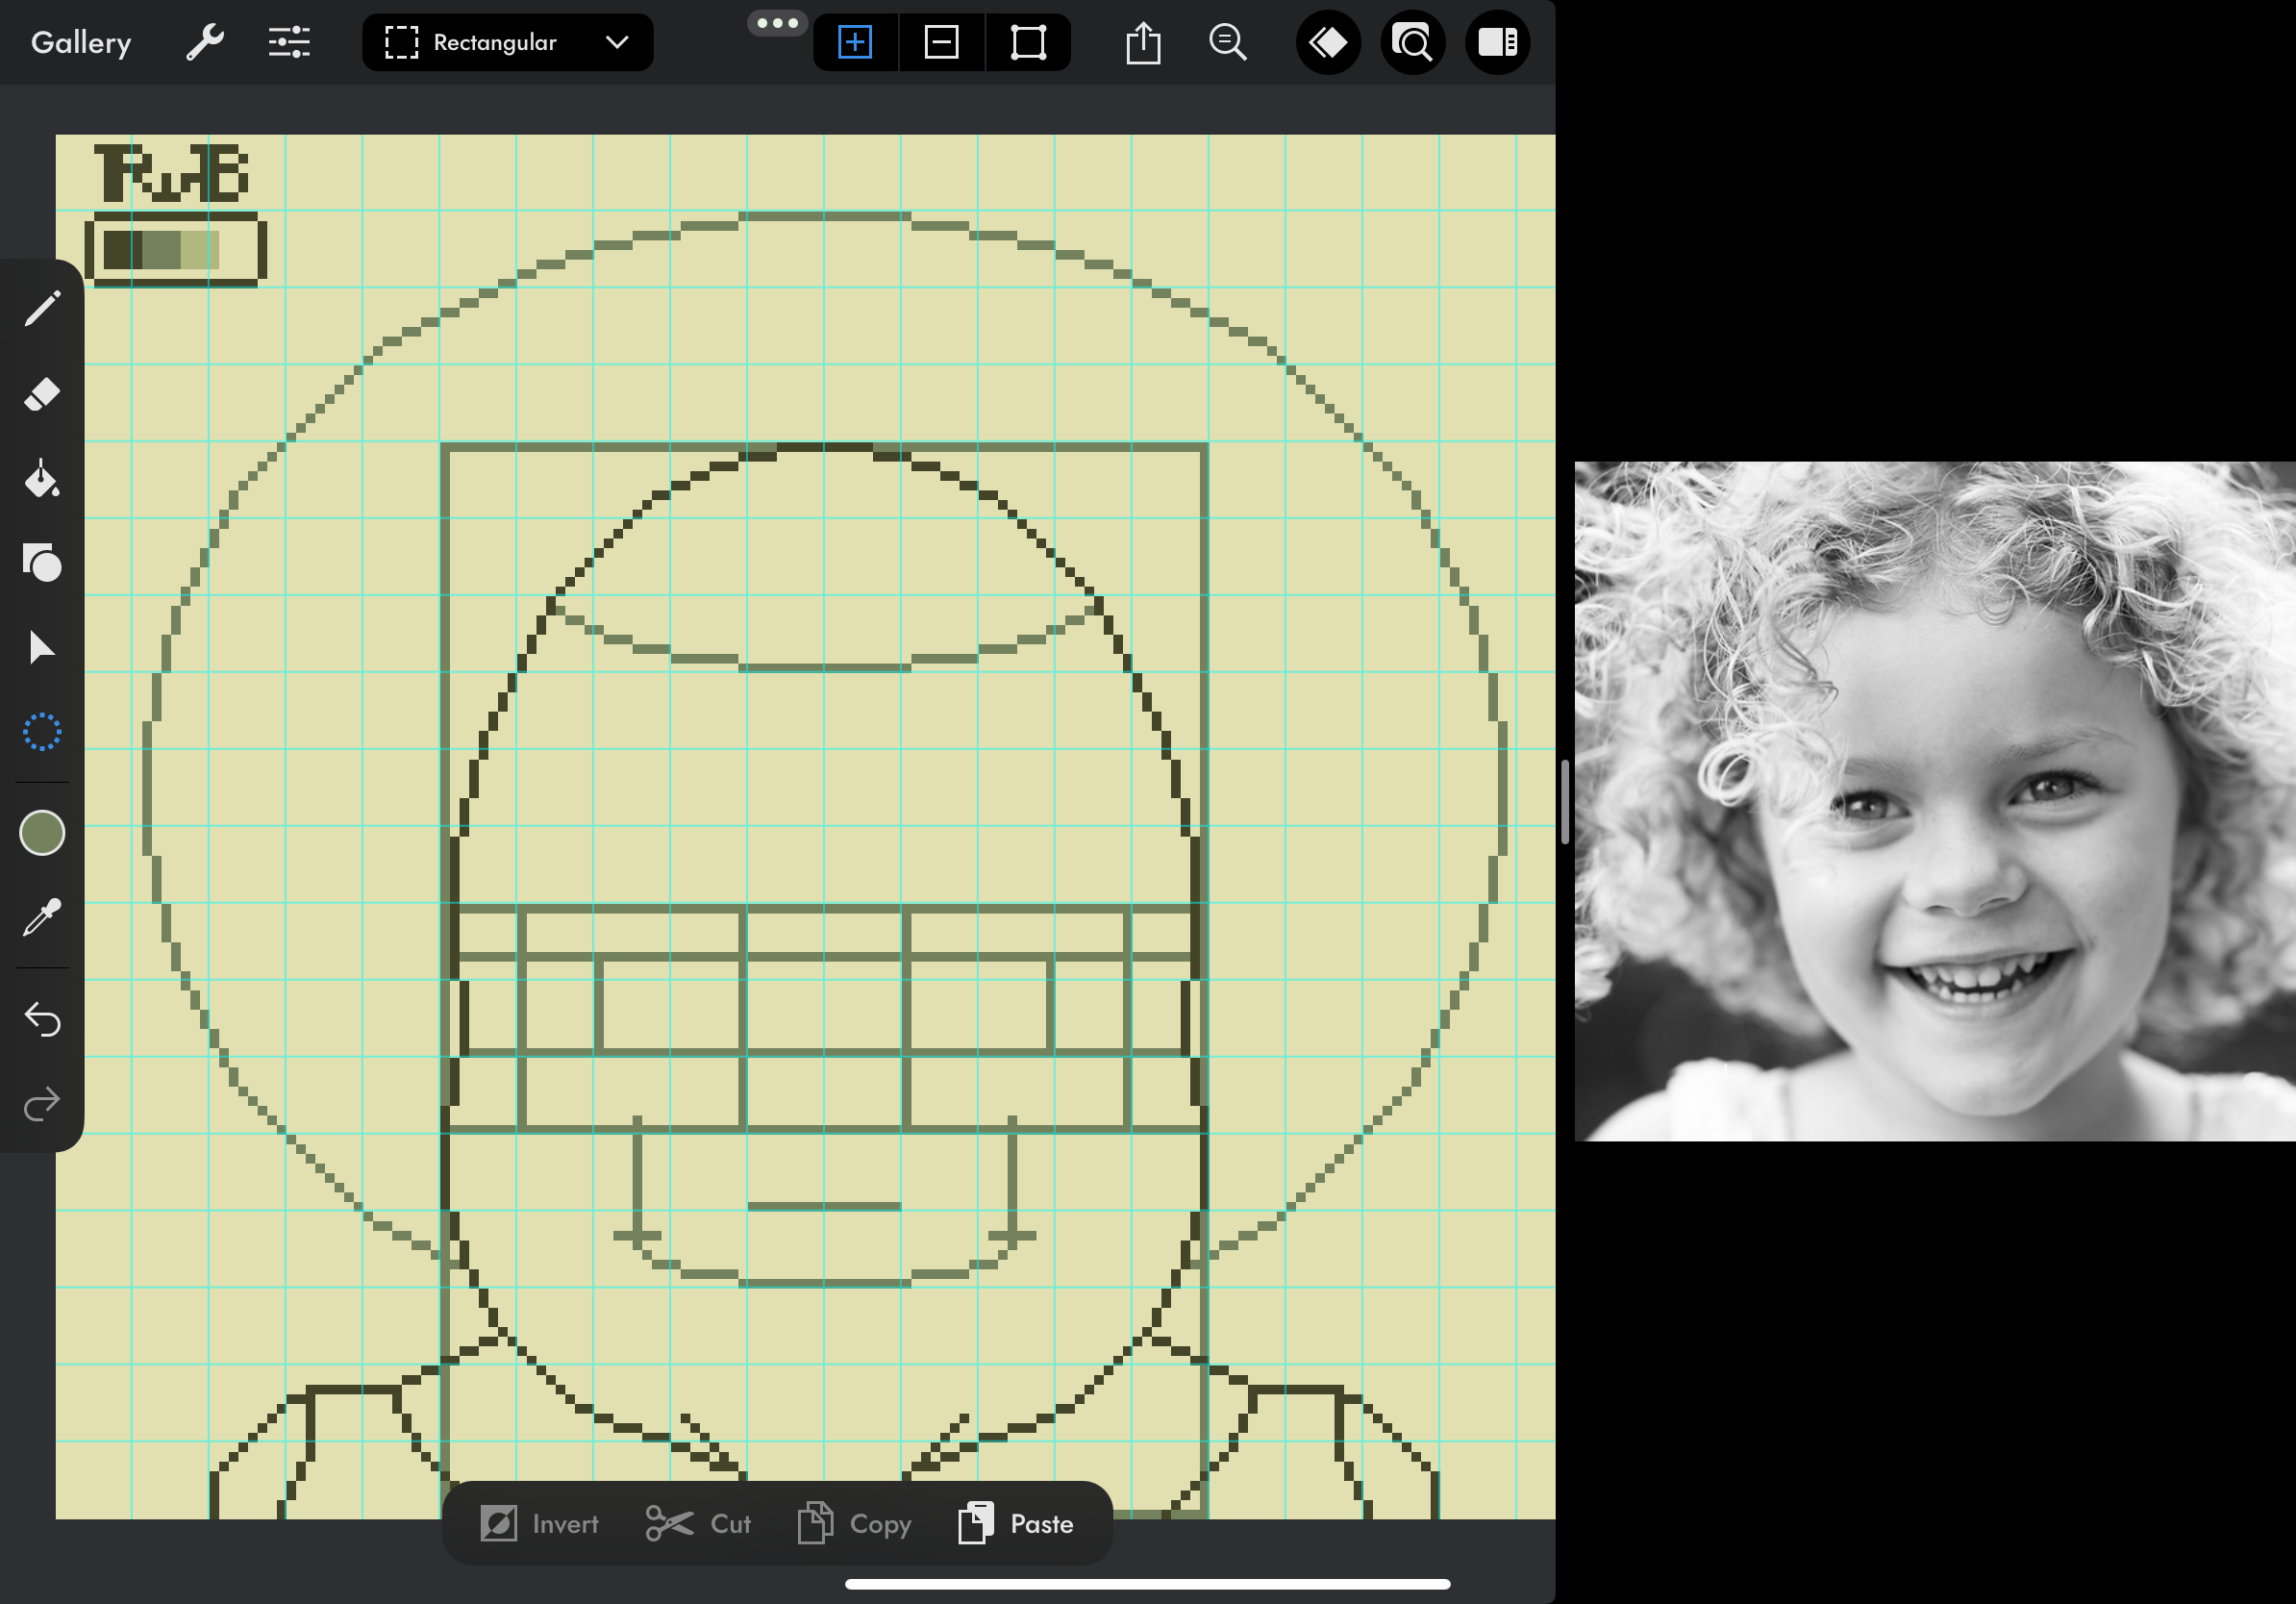 screenshot of a pixel art drawing and a reference photo next to it, in which the drawing shows the proportions from the reference photo